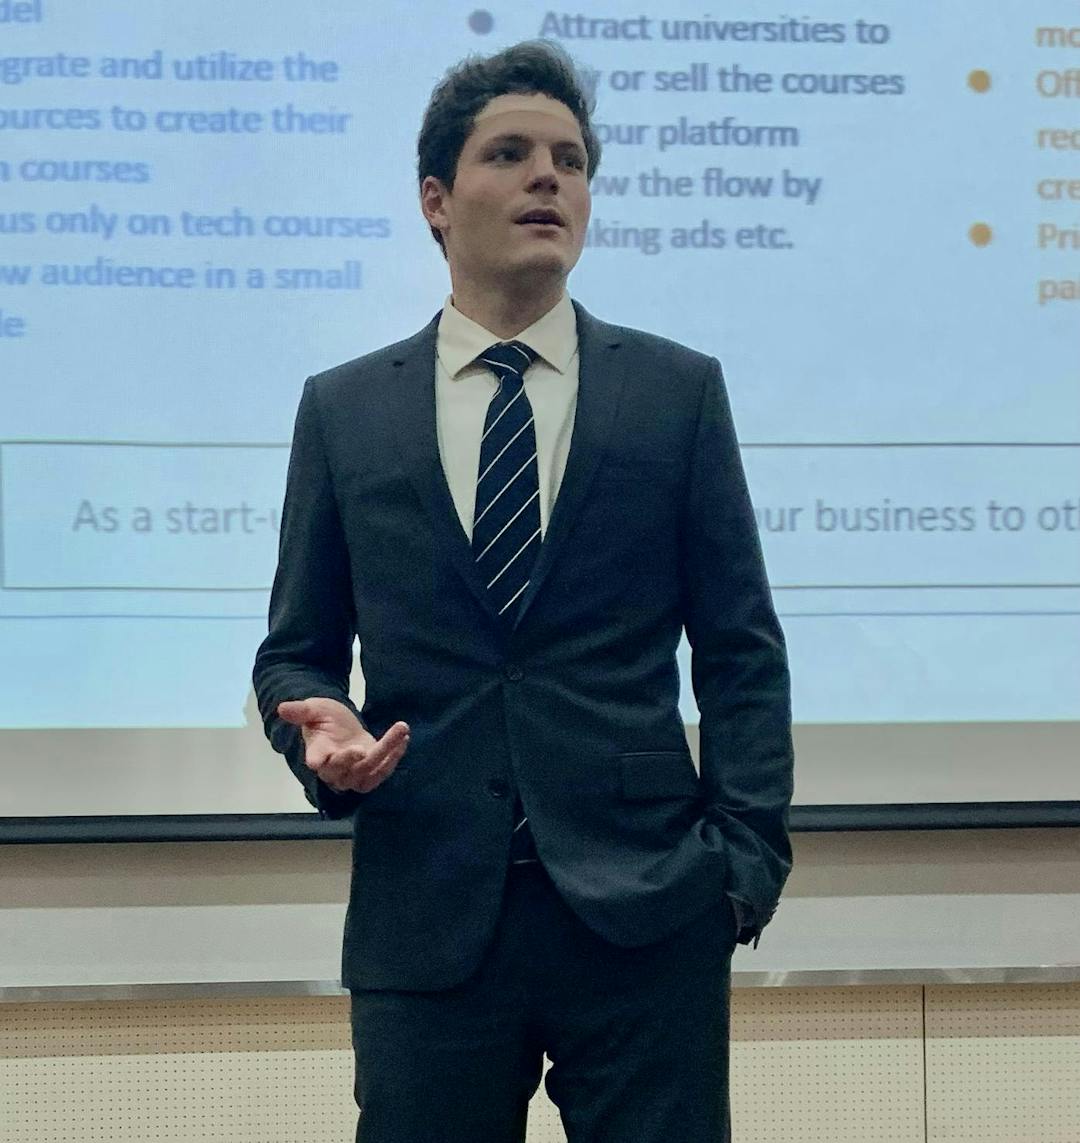 A man in a suit and tie stands and gestures while presenting in front of a projected screen displaying text and bullet points inside a lecture hall or conference room.